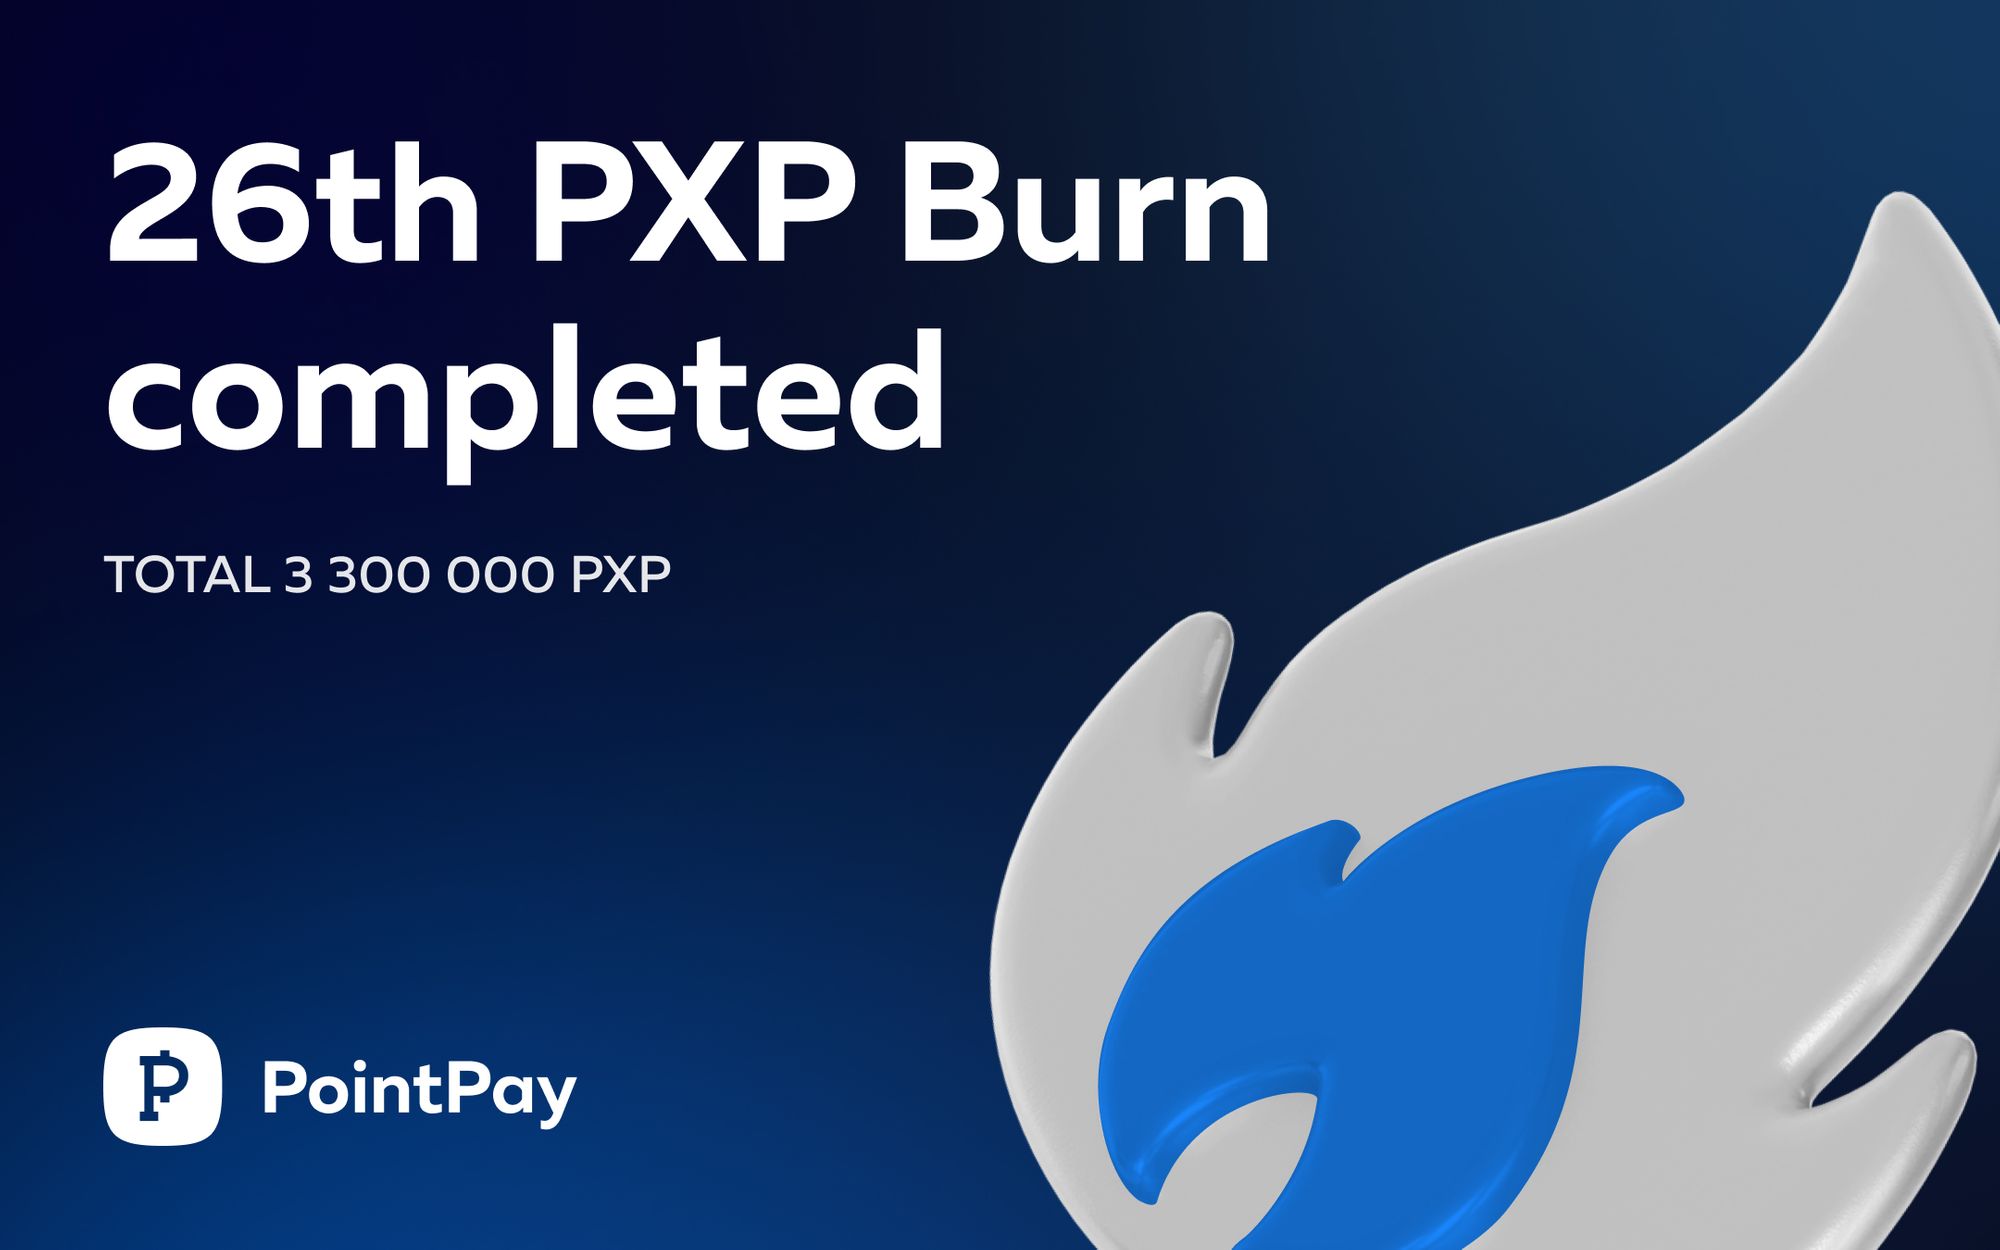 PointPay Celebrates Milestone with 26th PXP Token Burn and CoinGecko Ranking #14